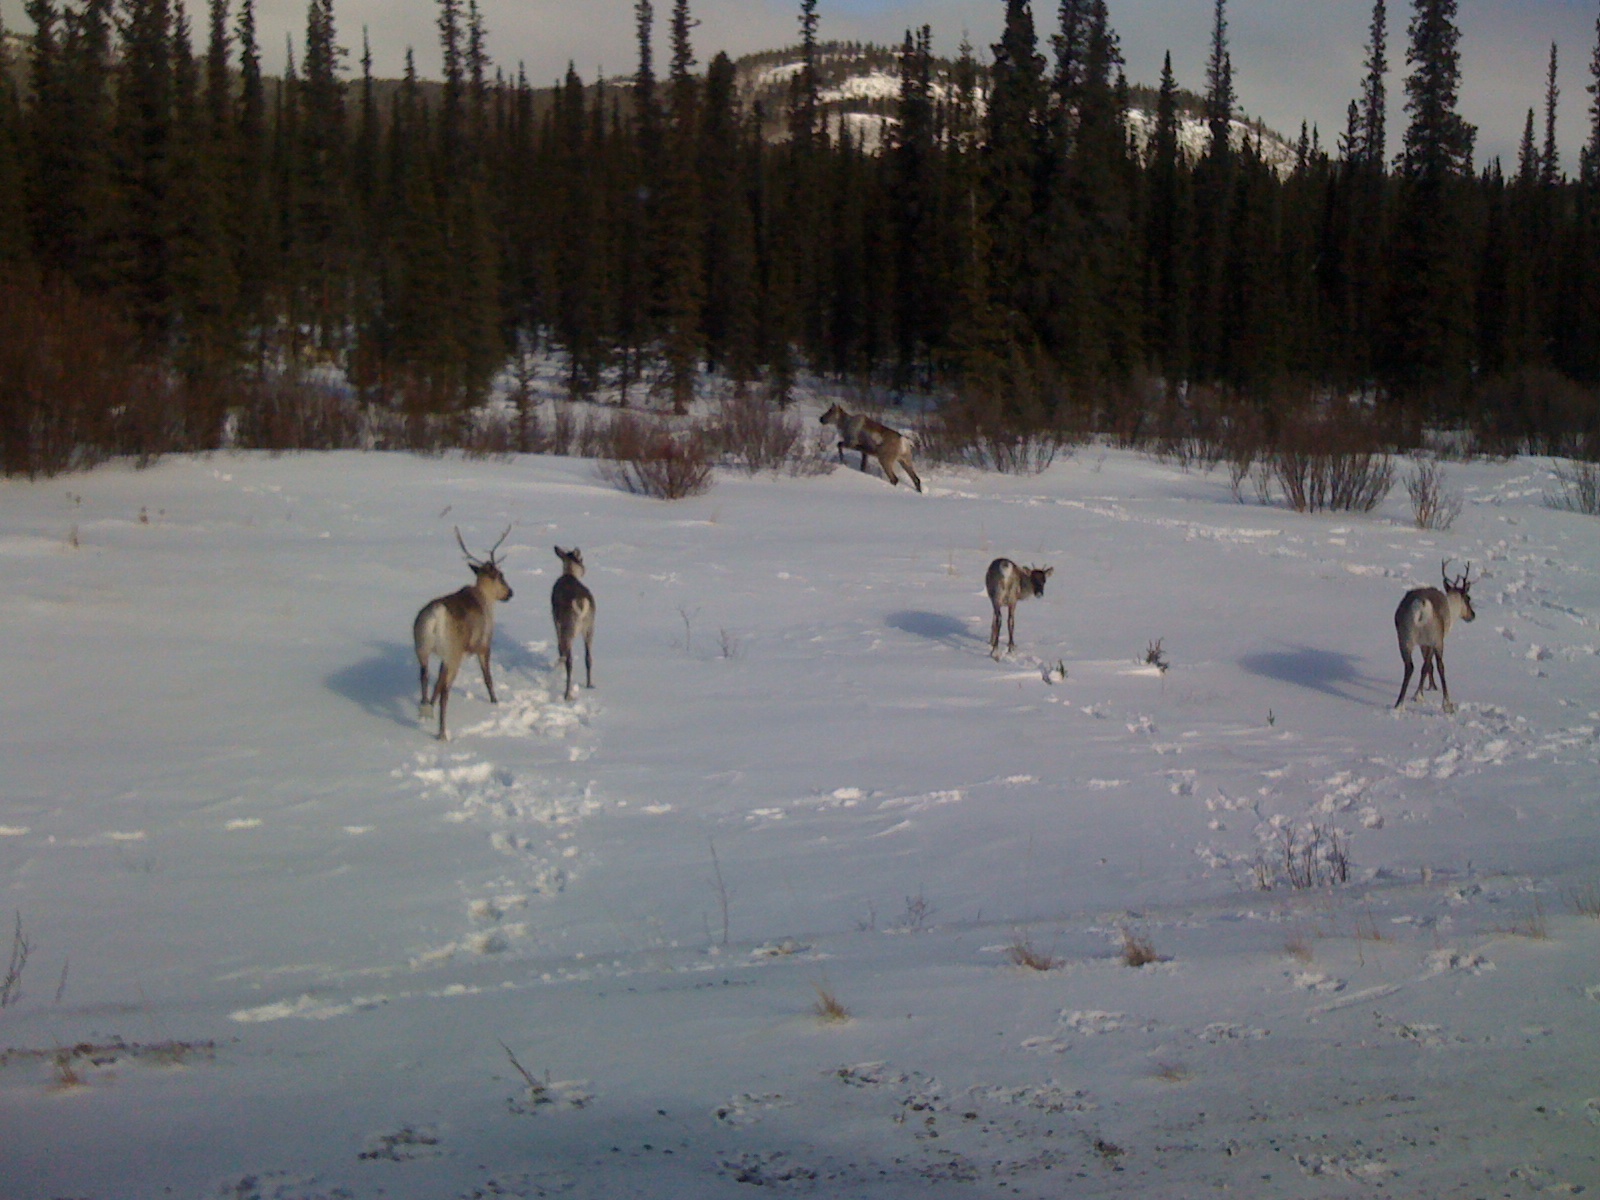 Caribou on the side of the road in Canada.